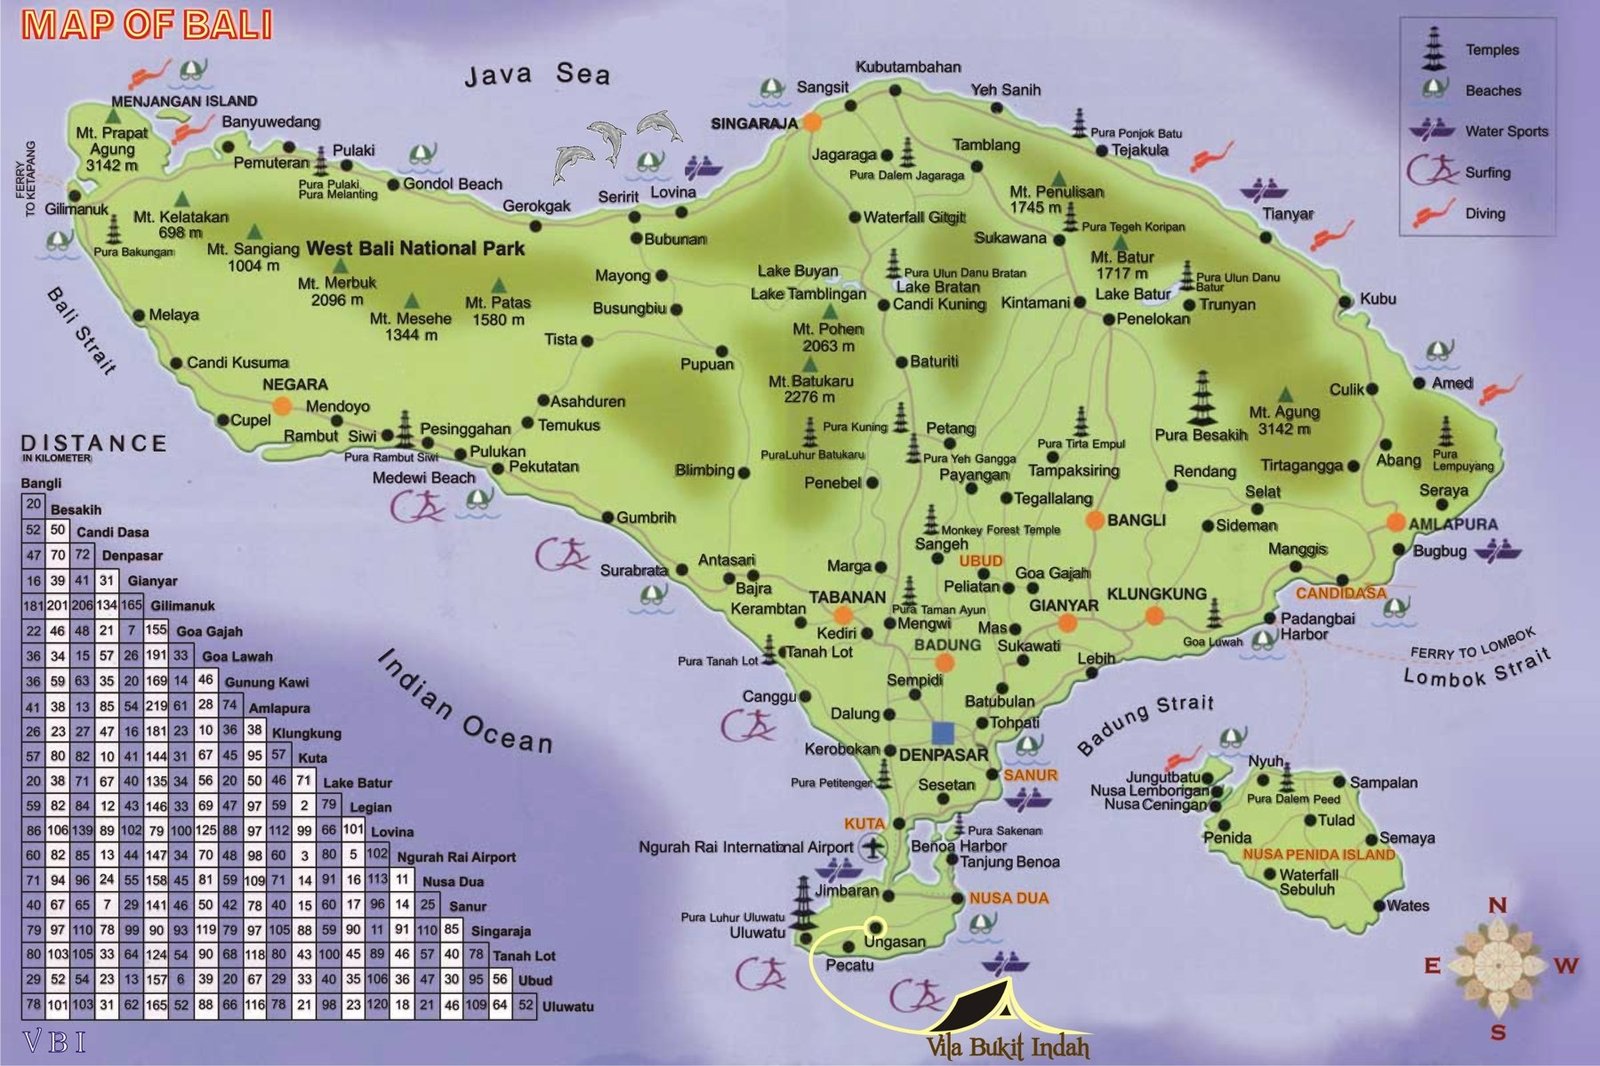 bali map with tourist spots